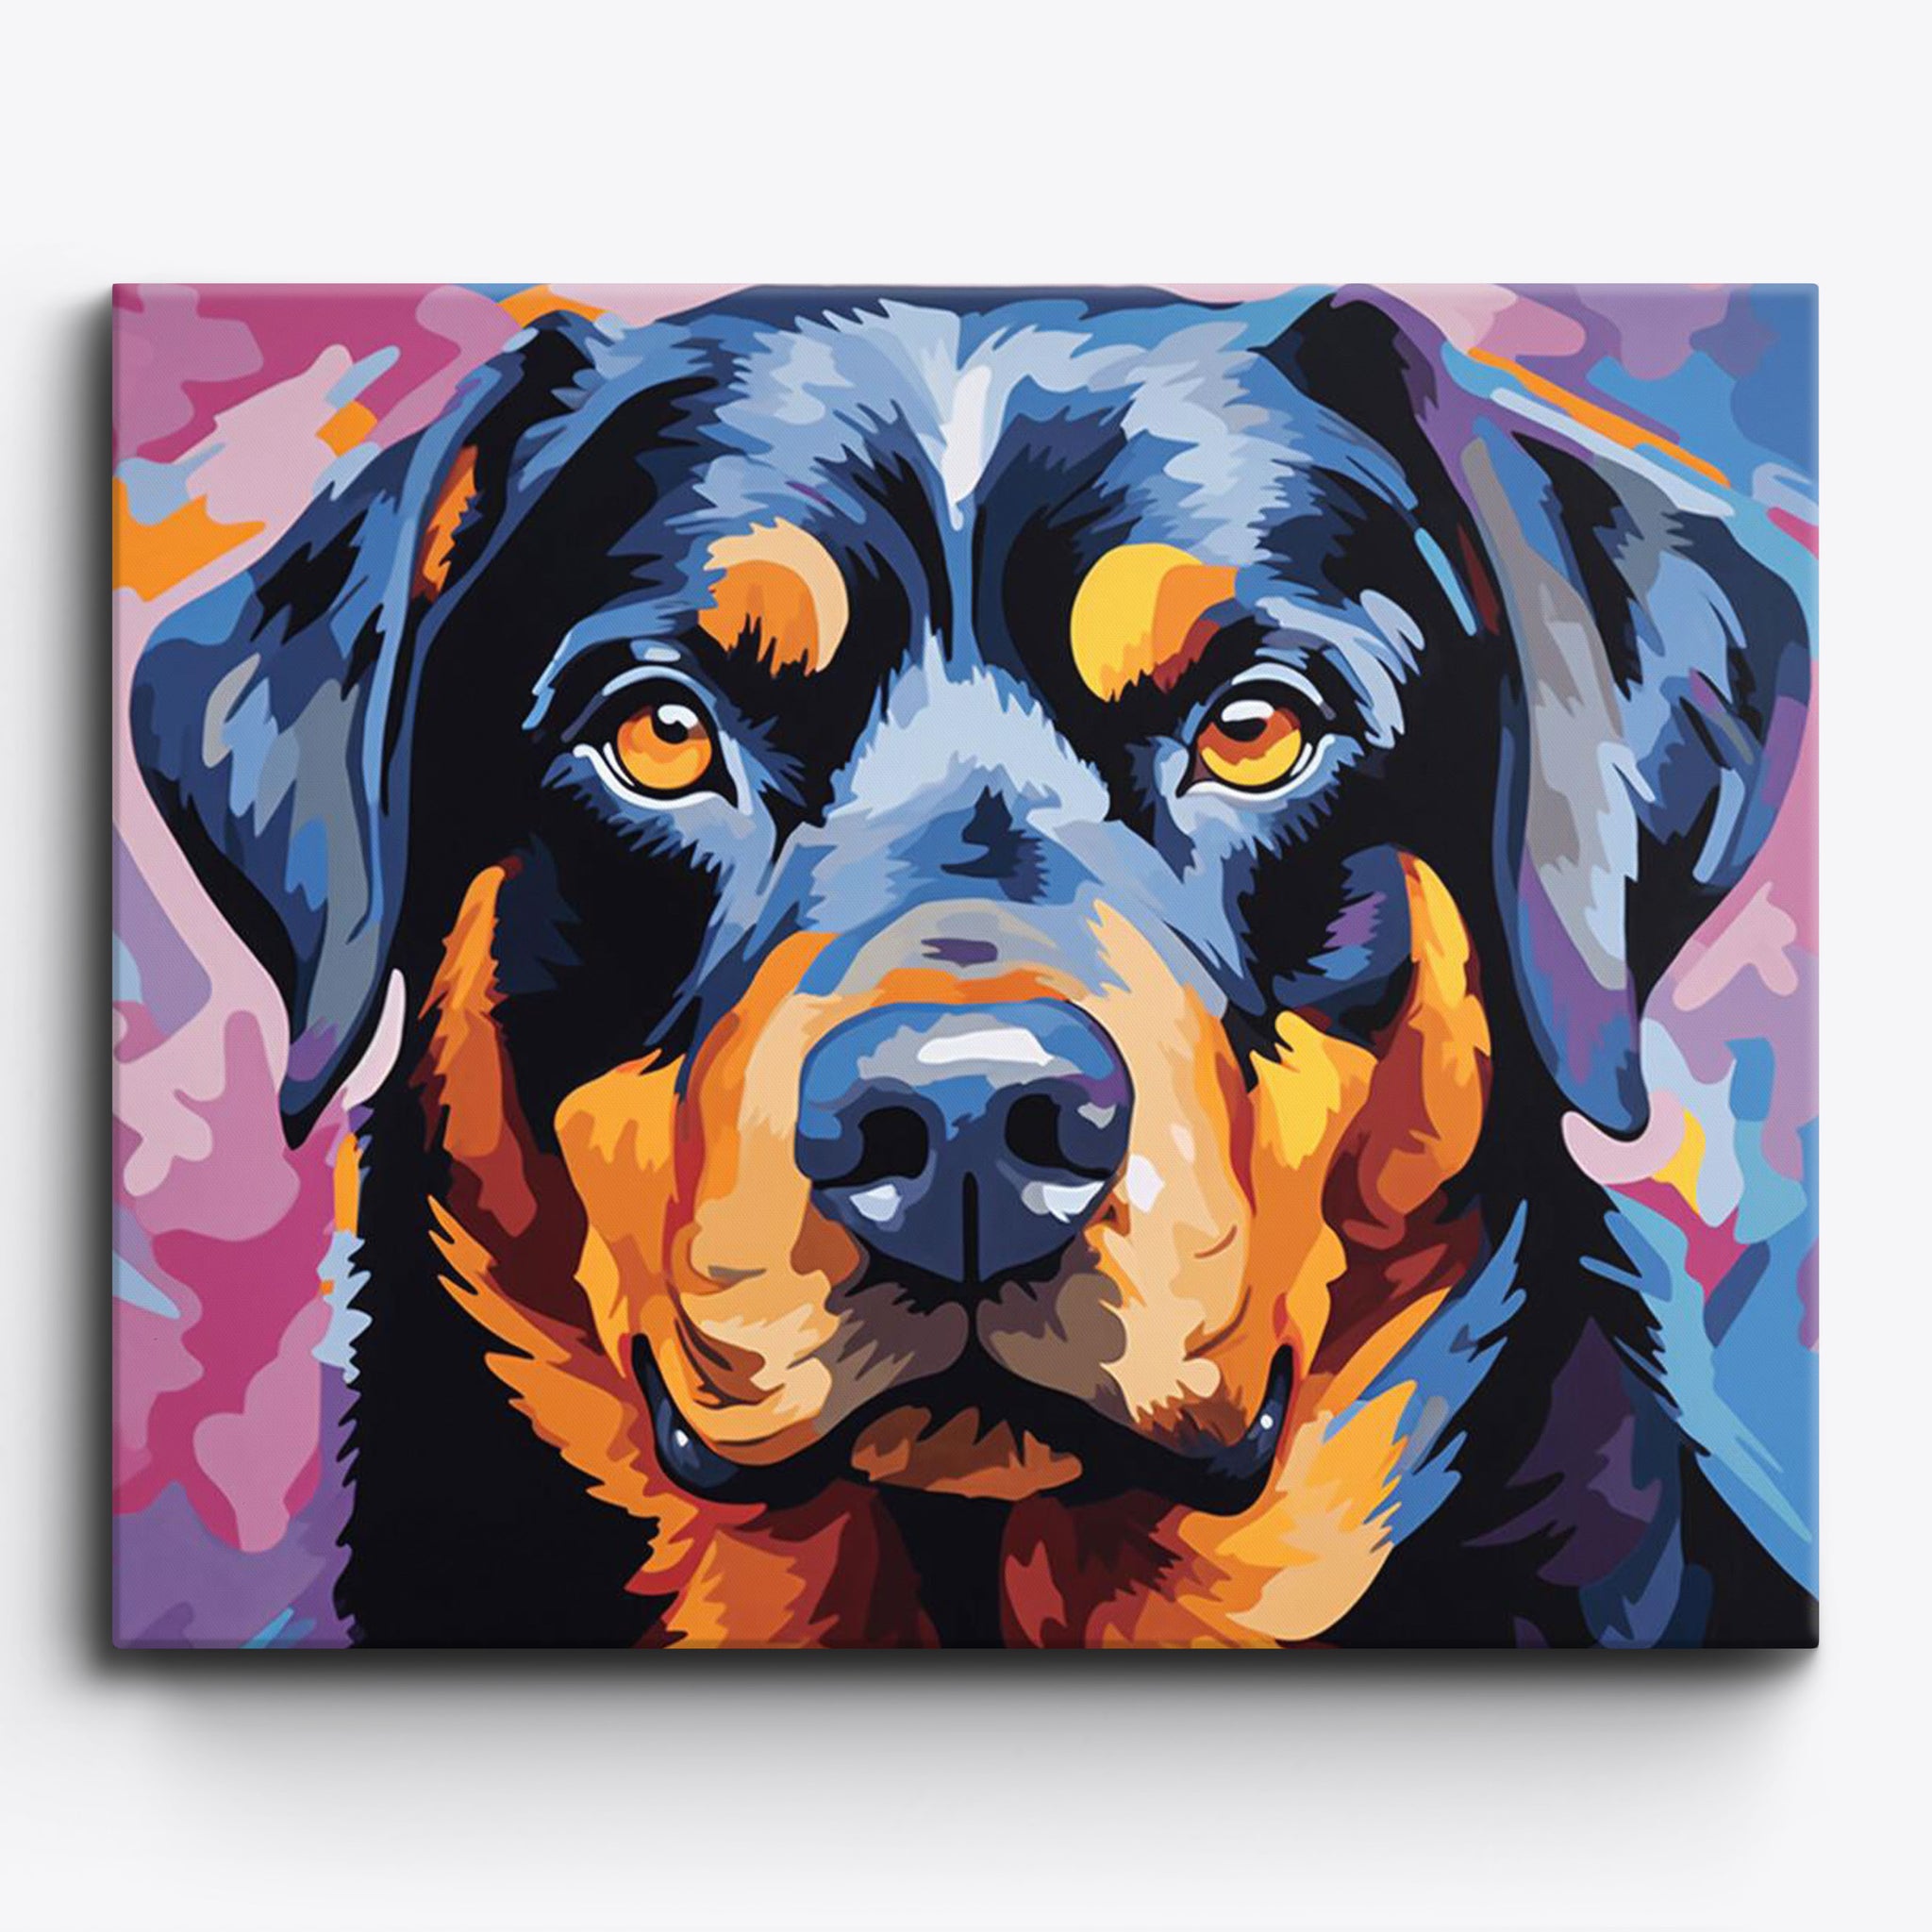 SKMN Paint by Numbers for Kids Ages 8-12 Girls,Cute Animal Rottweiler Pet  Dog,DIY Oil Painting Kit Impression Retro Wall Decor Gift Kits,40x50cm :  : Home & Kitchen